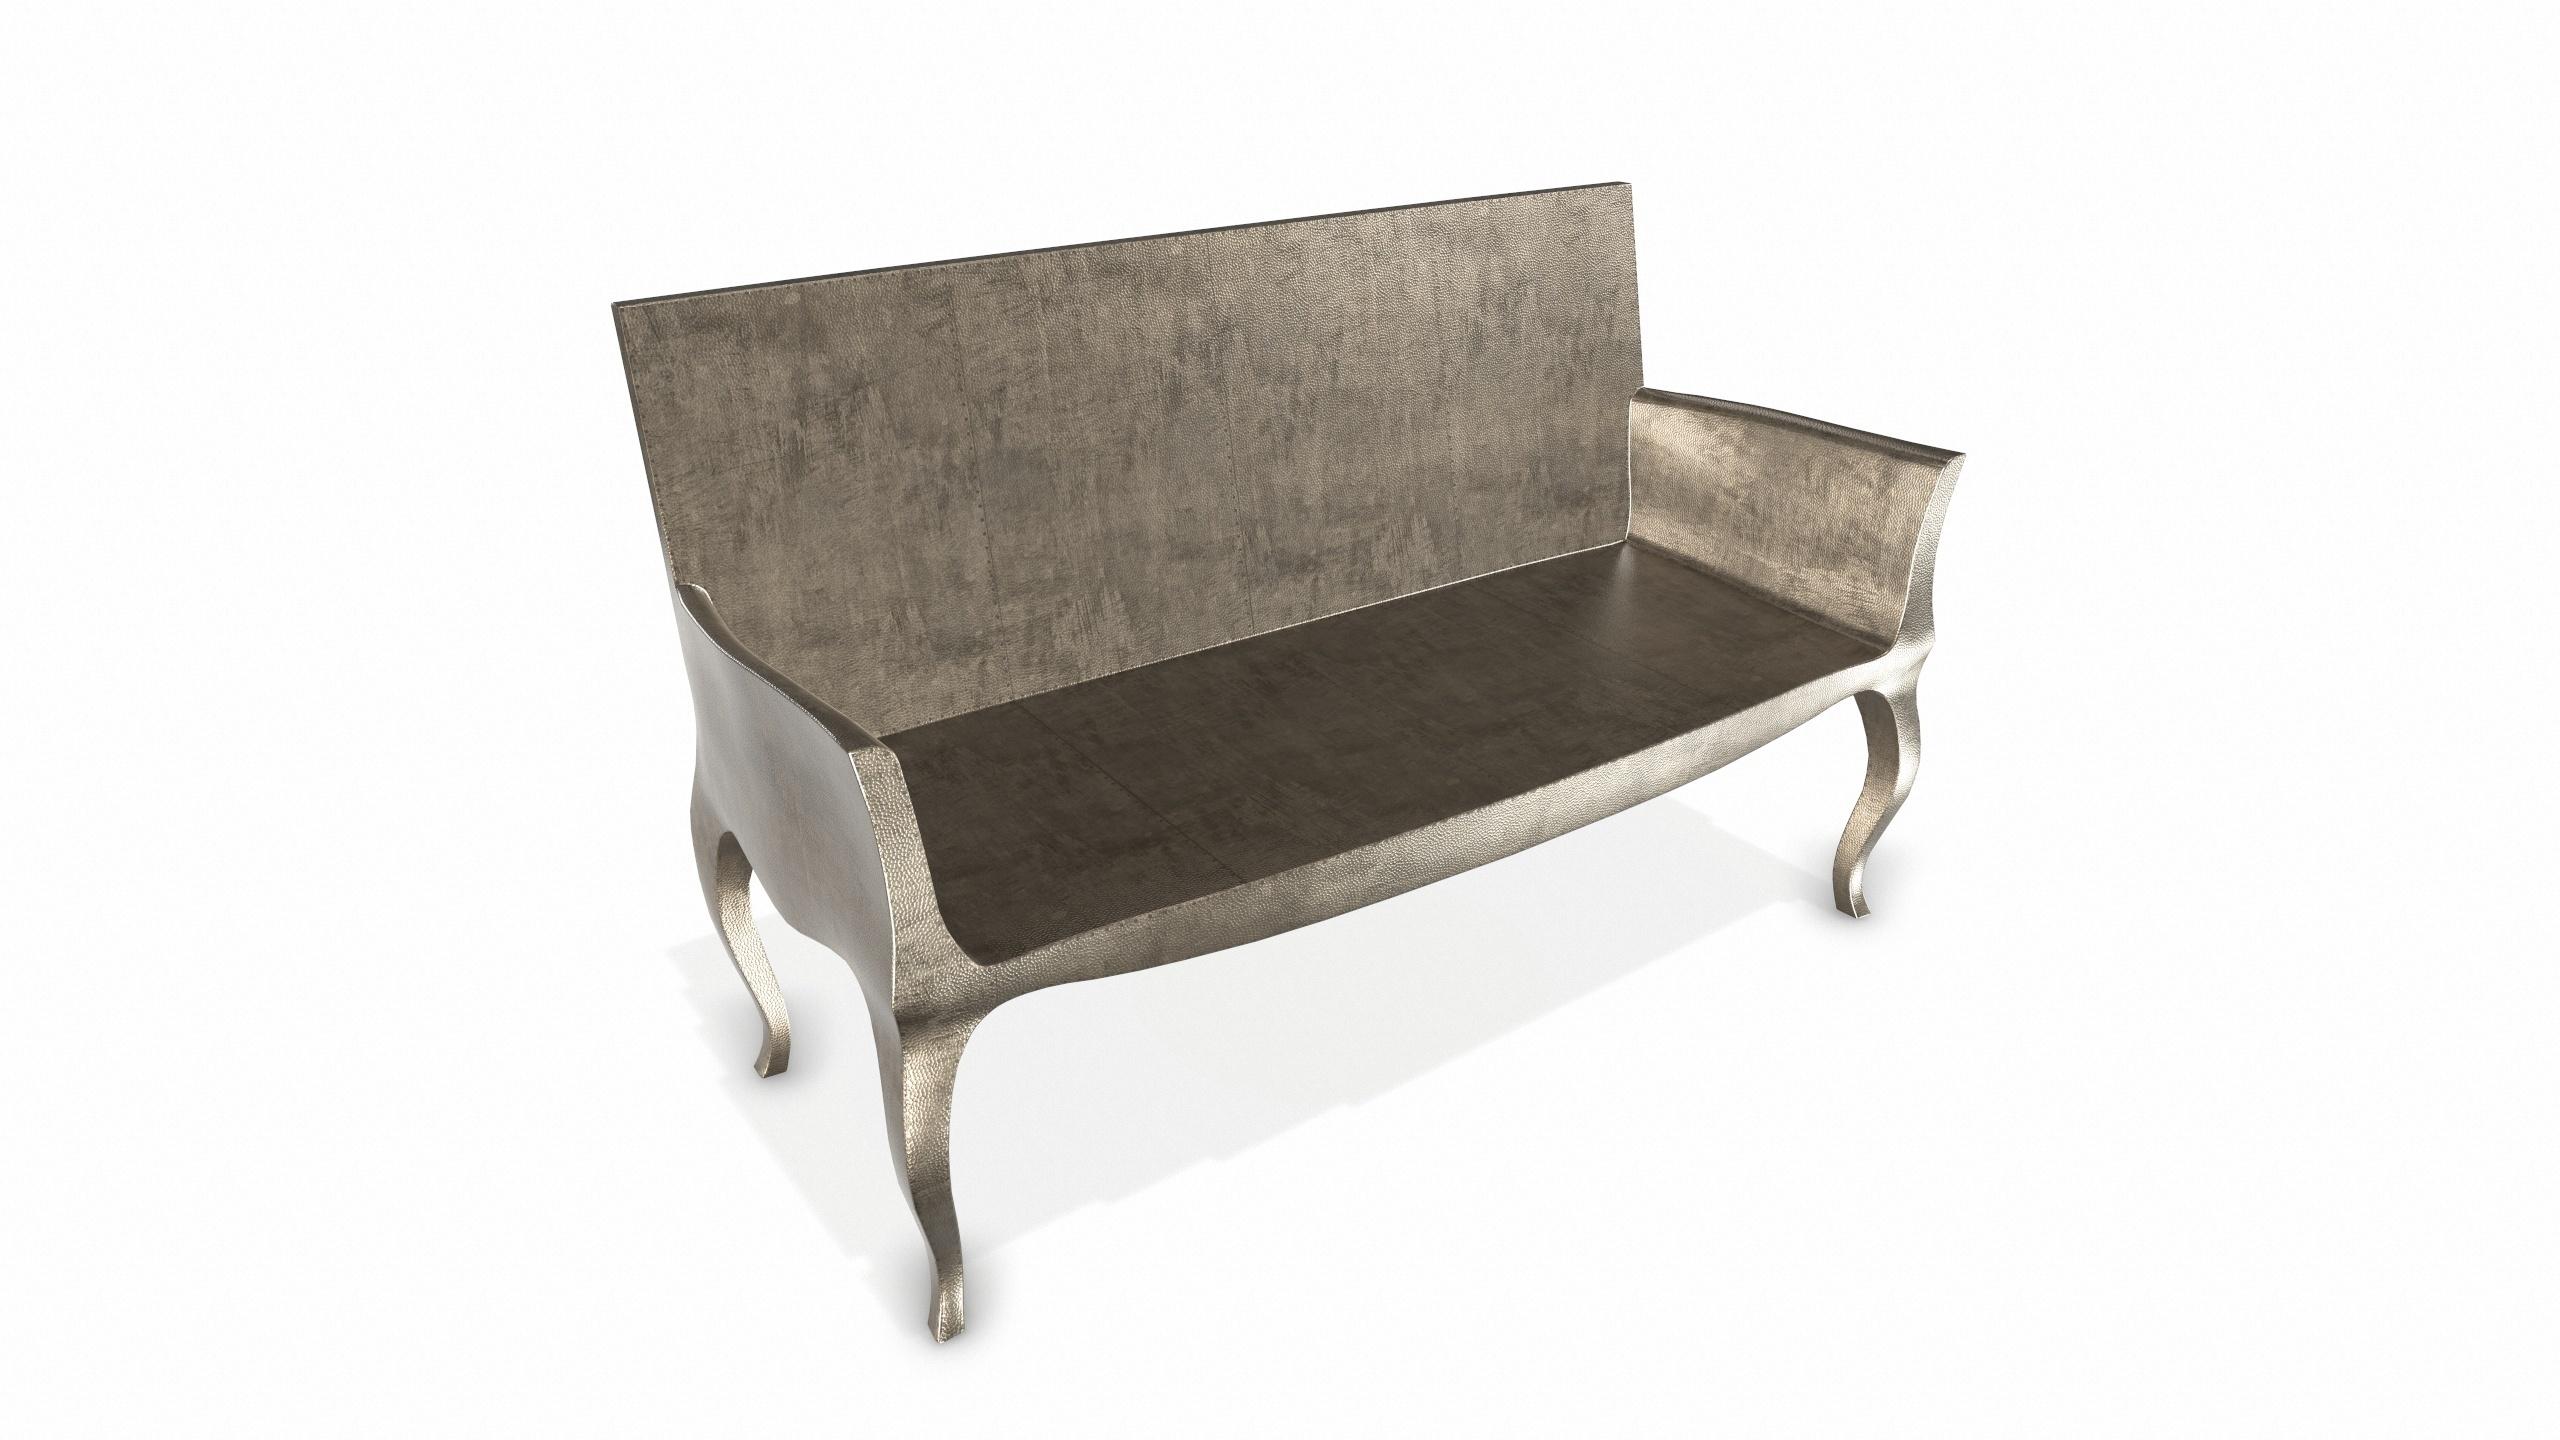 Louise Settee Art Deco Daybeds in Mid. Hammered Antique Bronze by Paul Mathieu  For Sale 2